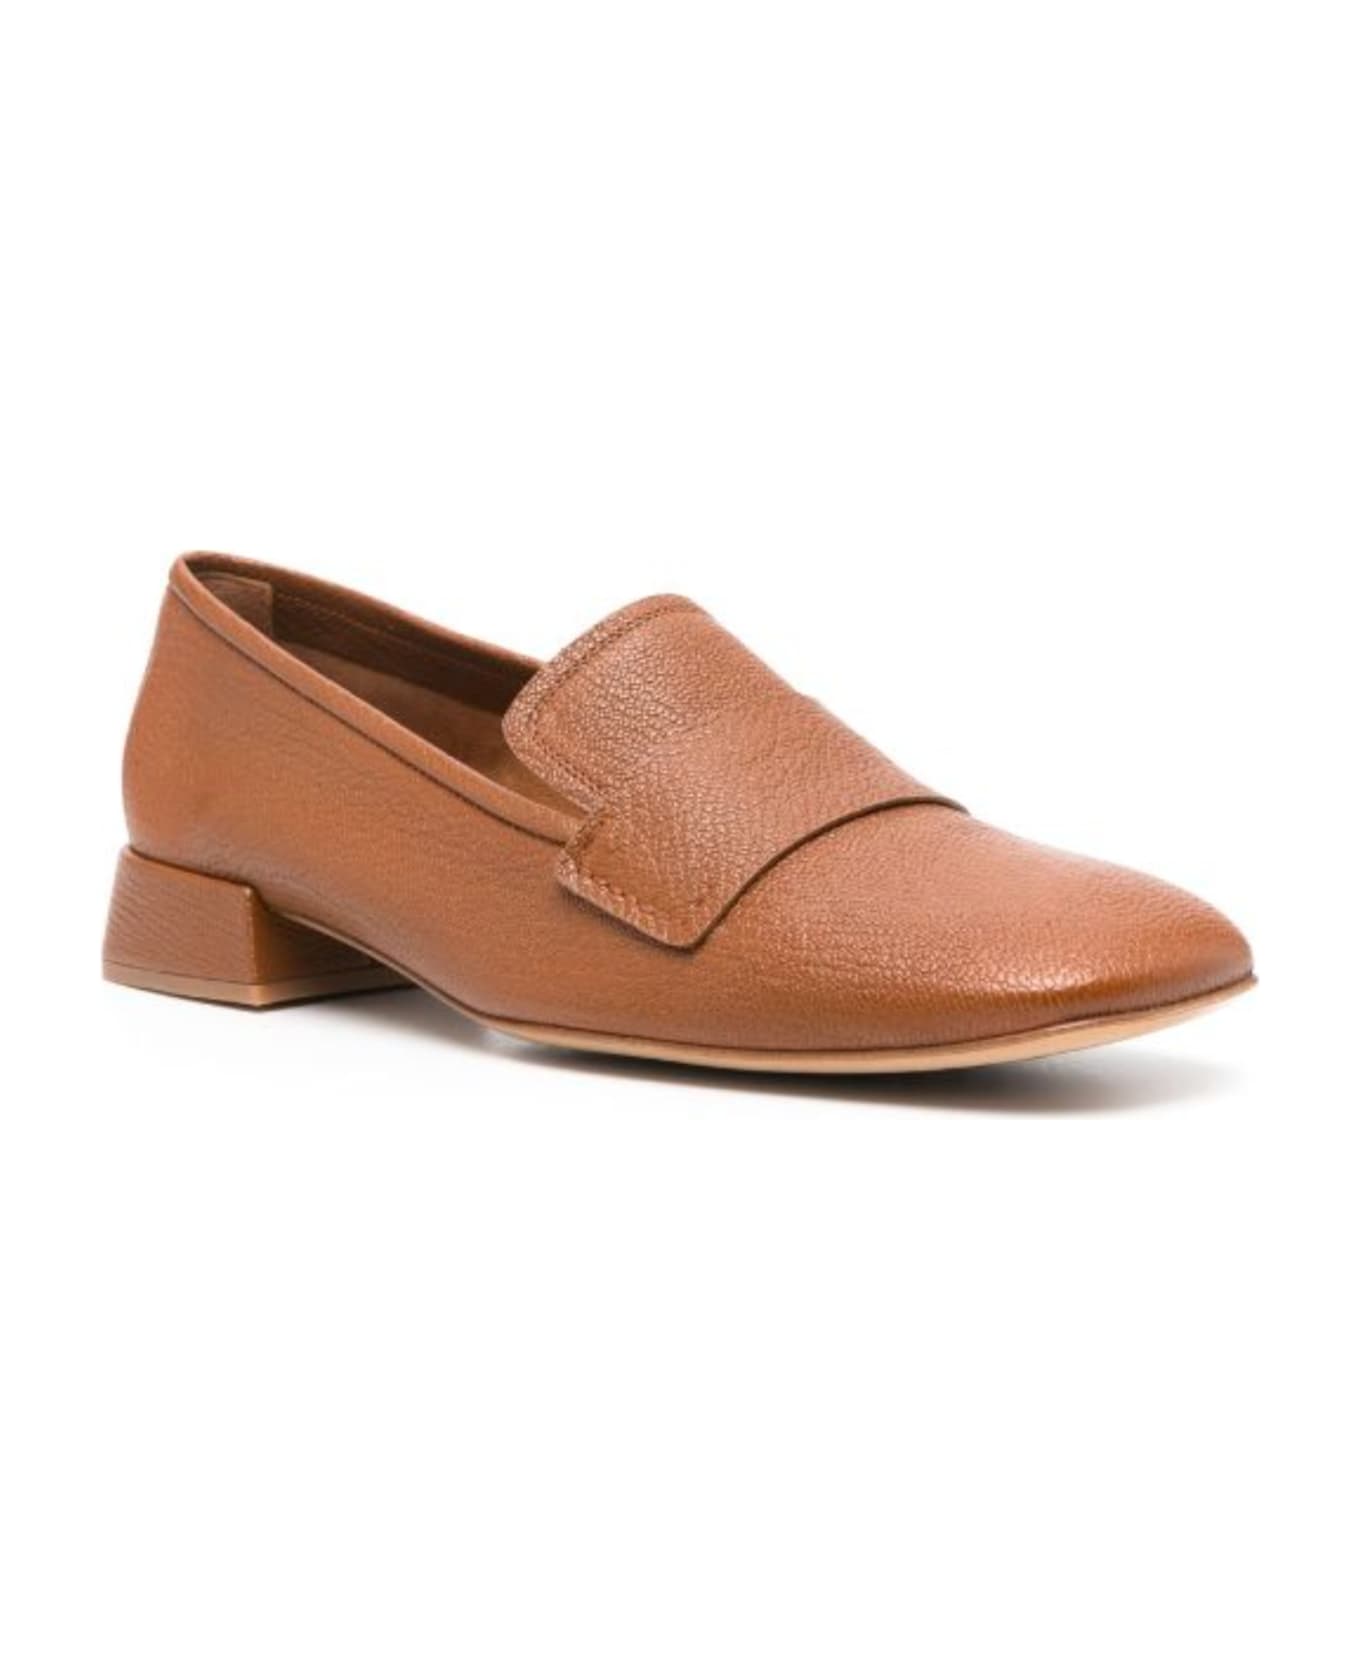 Pedro Garcia "galit" Leather Loafers - Brown